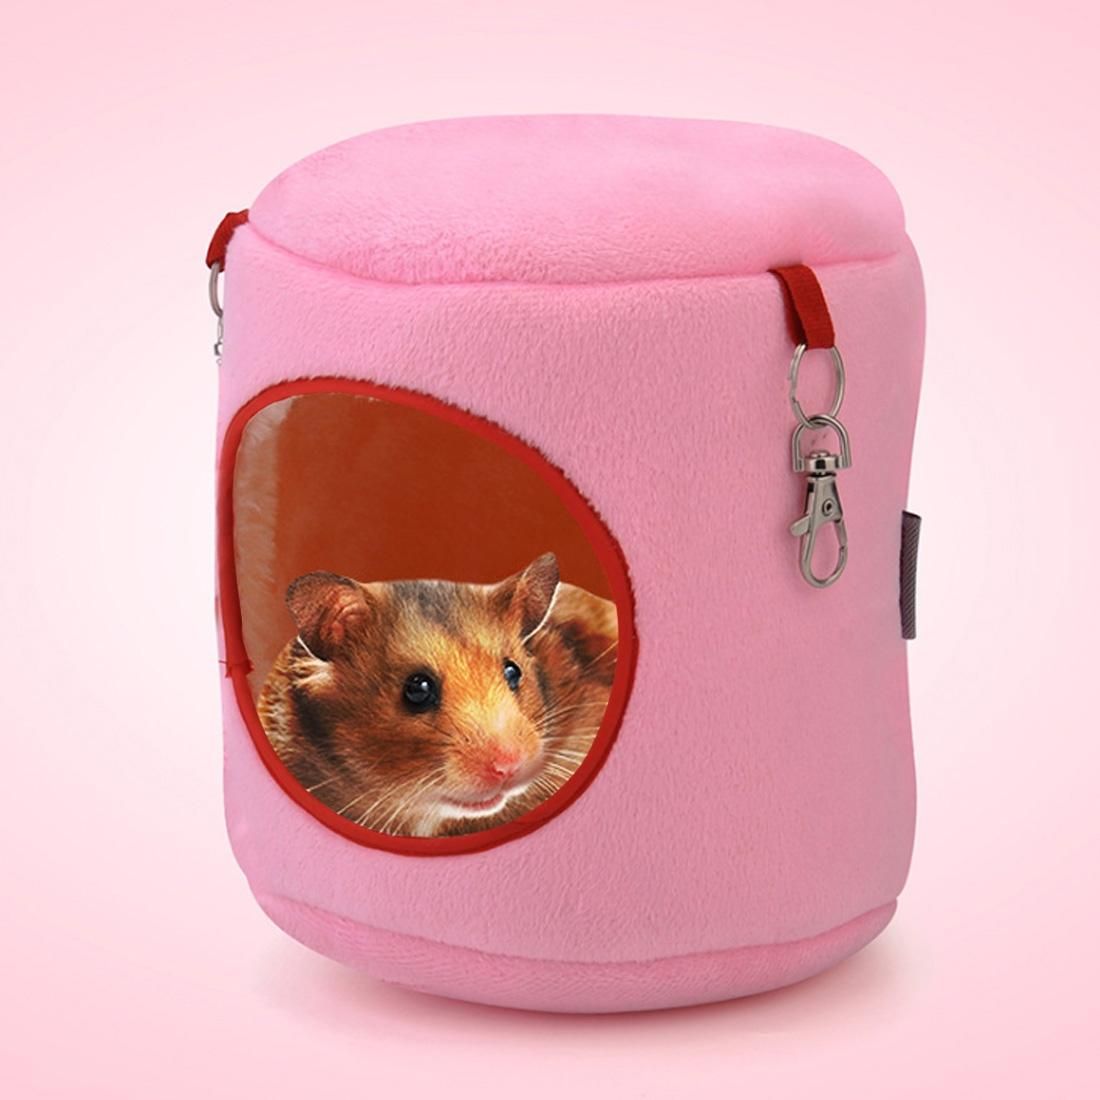 Flannel Cylinder Pet House Warm Hamster Hammock Hanging Bed Small Pets Nest, S, Size:10*9*9cm (Pink)